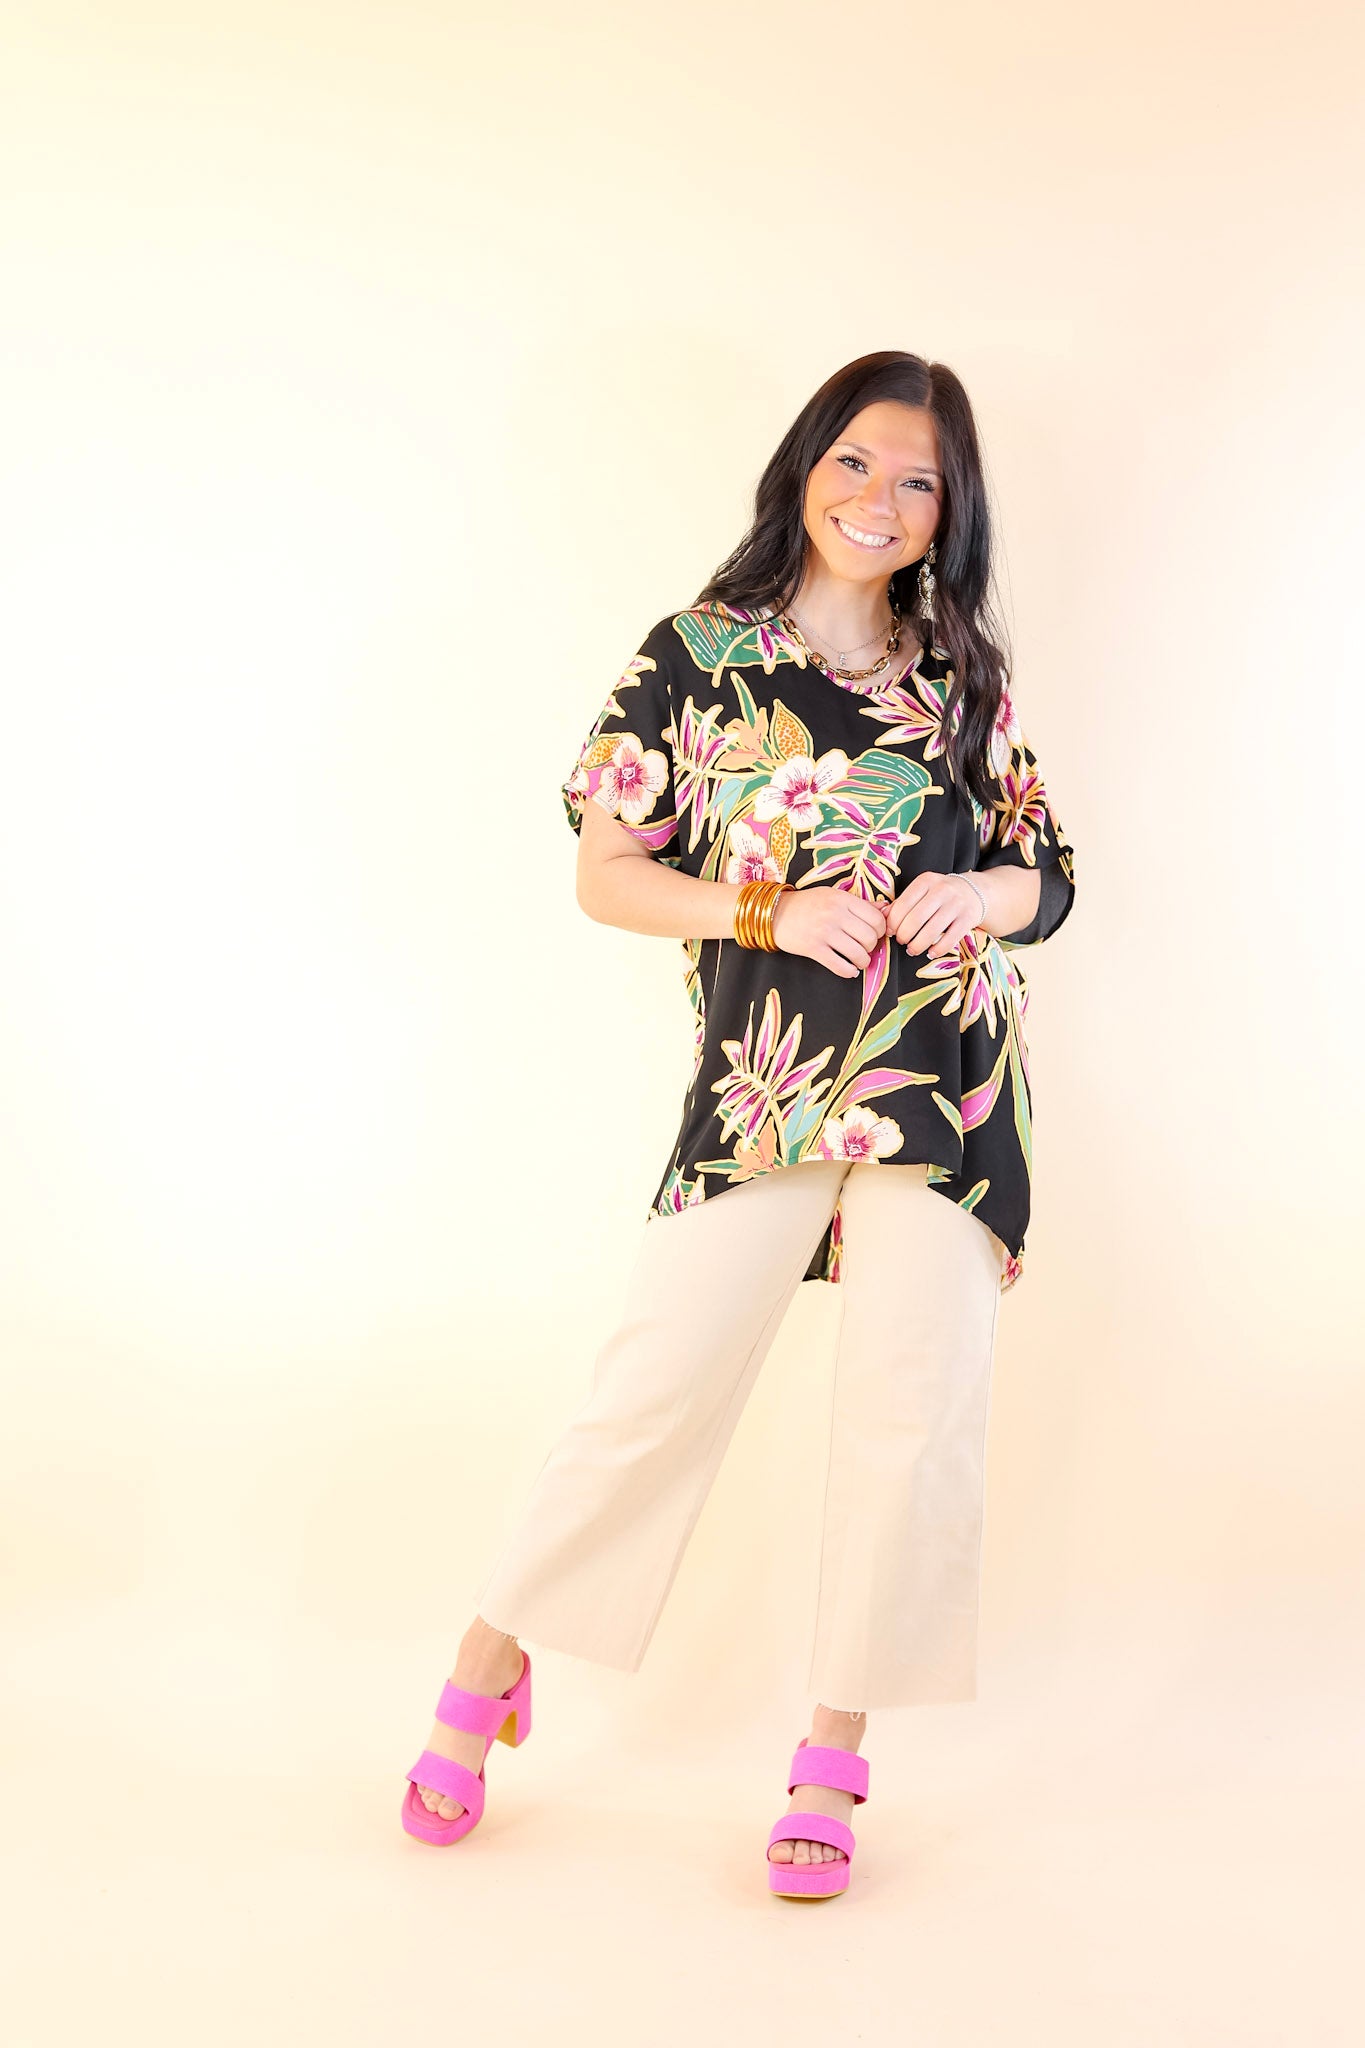 Island Oasis Tropical Floral Print Top in Black - Giddy Up Glamour Boutique